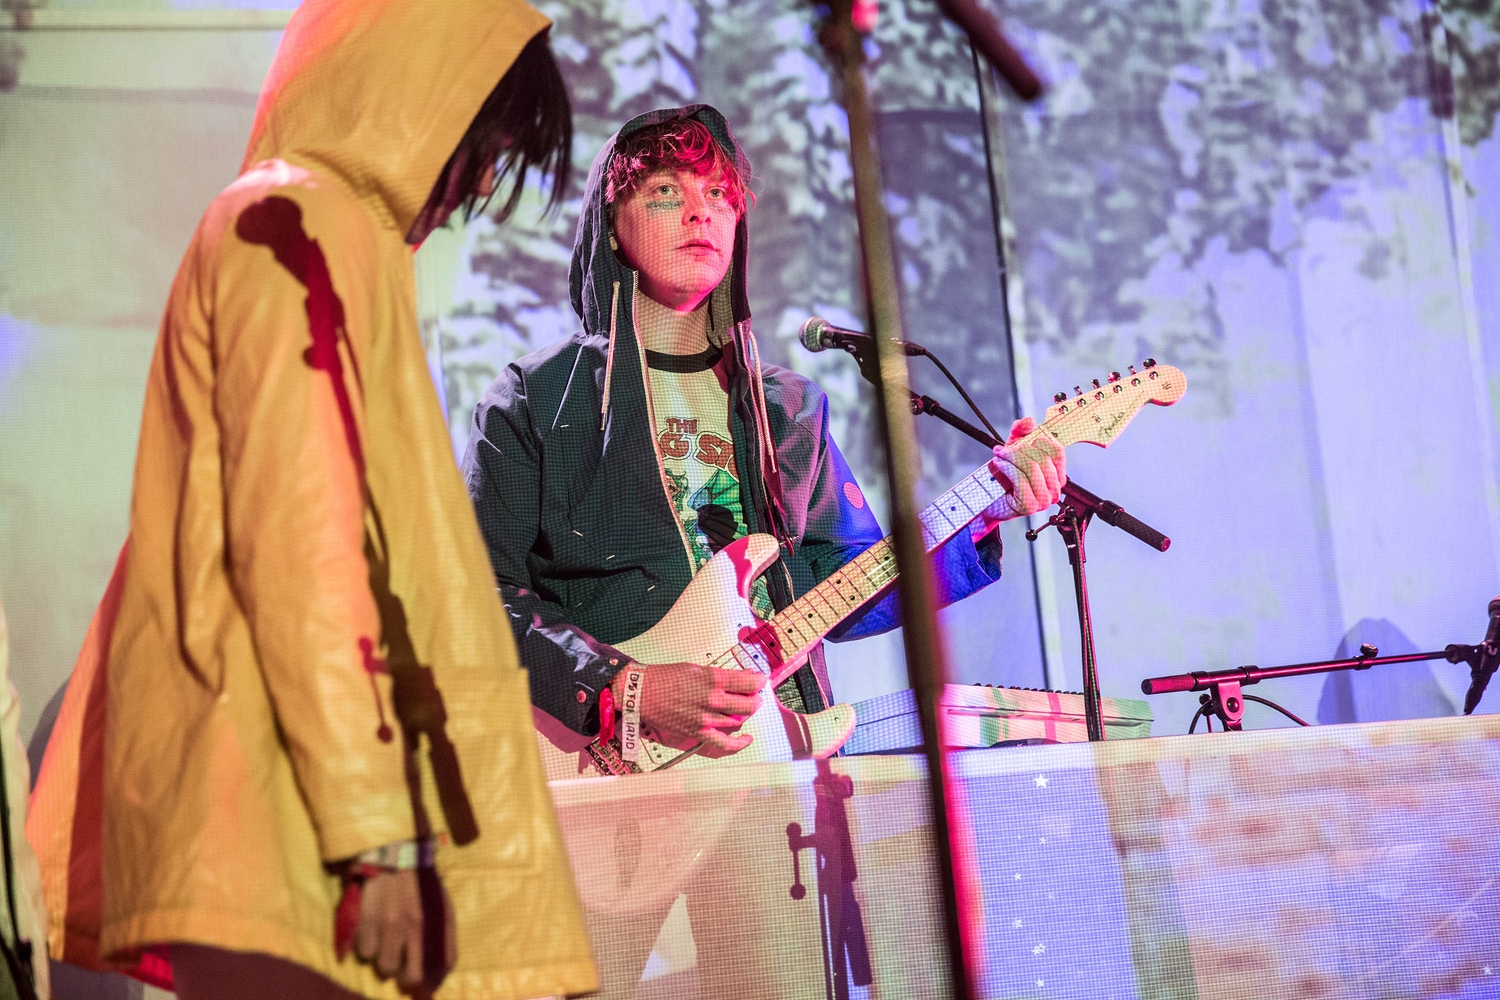 Superorganism, Iceage, Canshaker Pi and more head up the charge at Eurosonic 2018